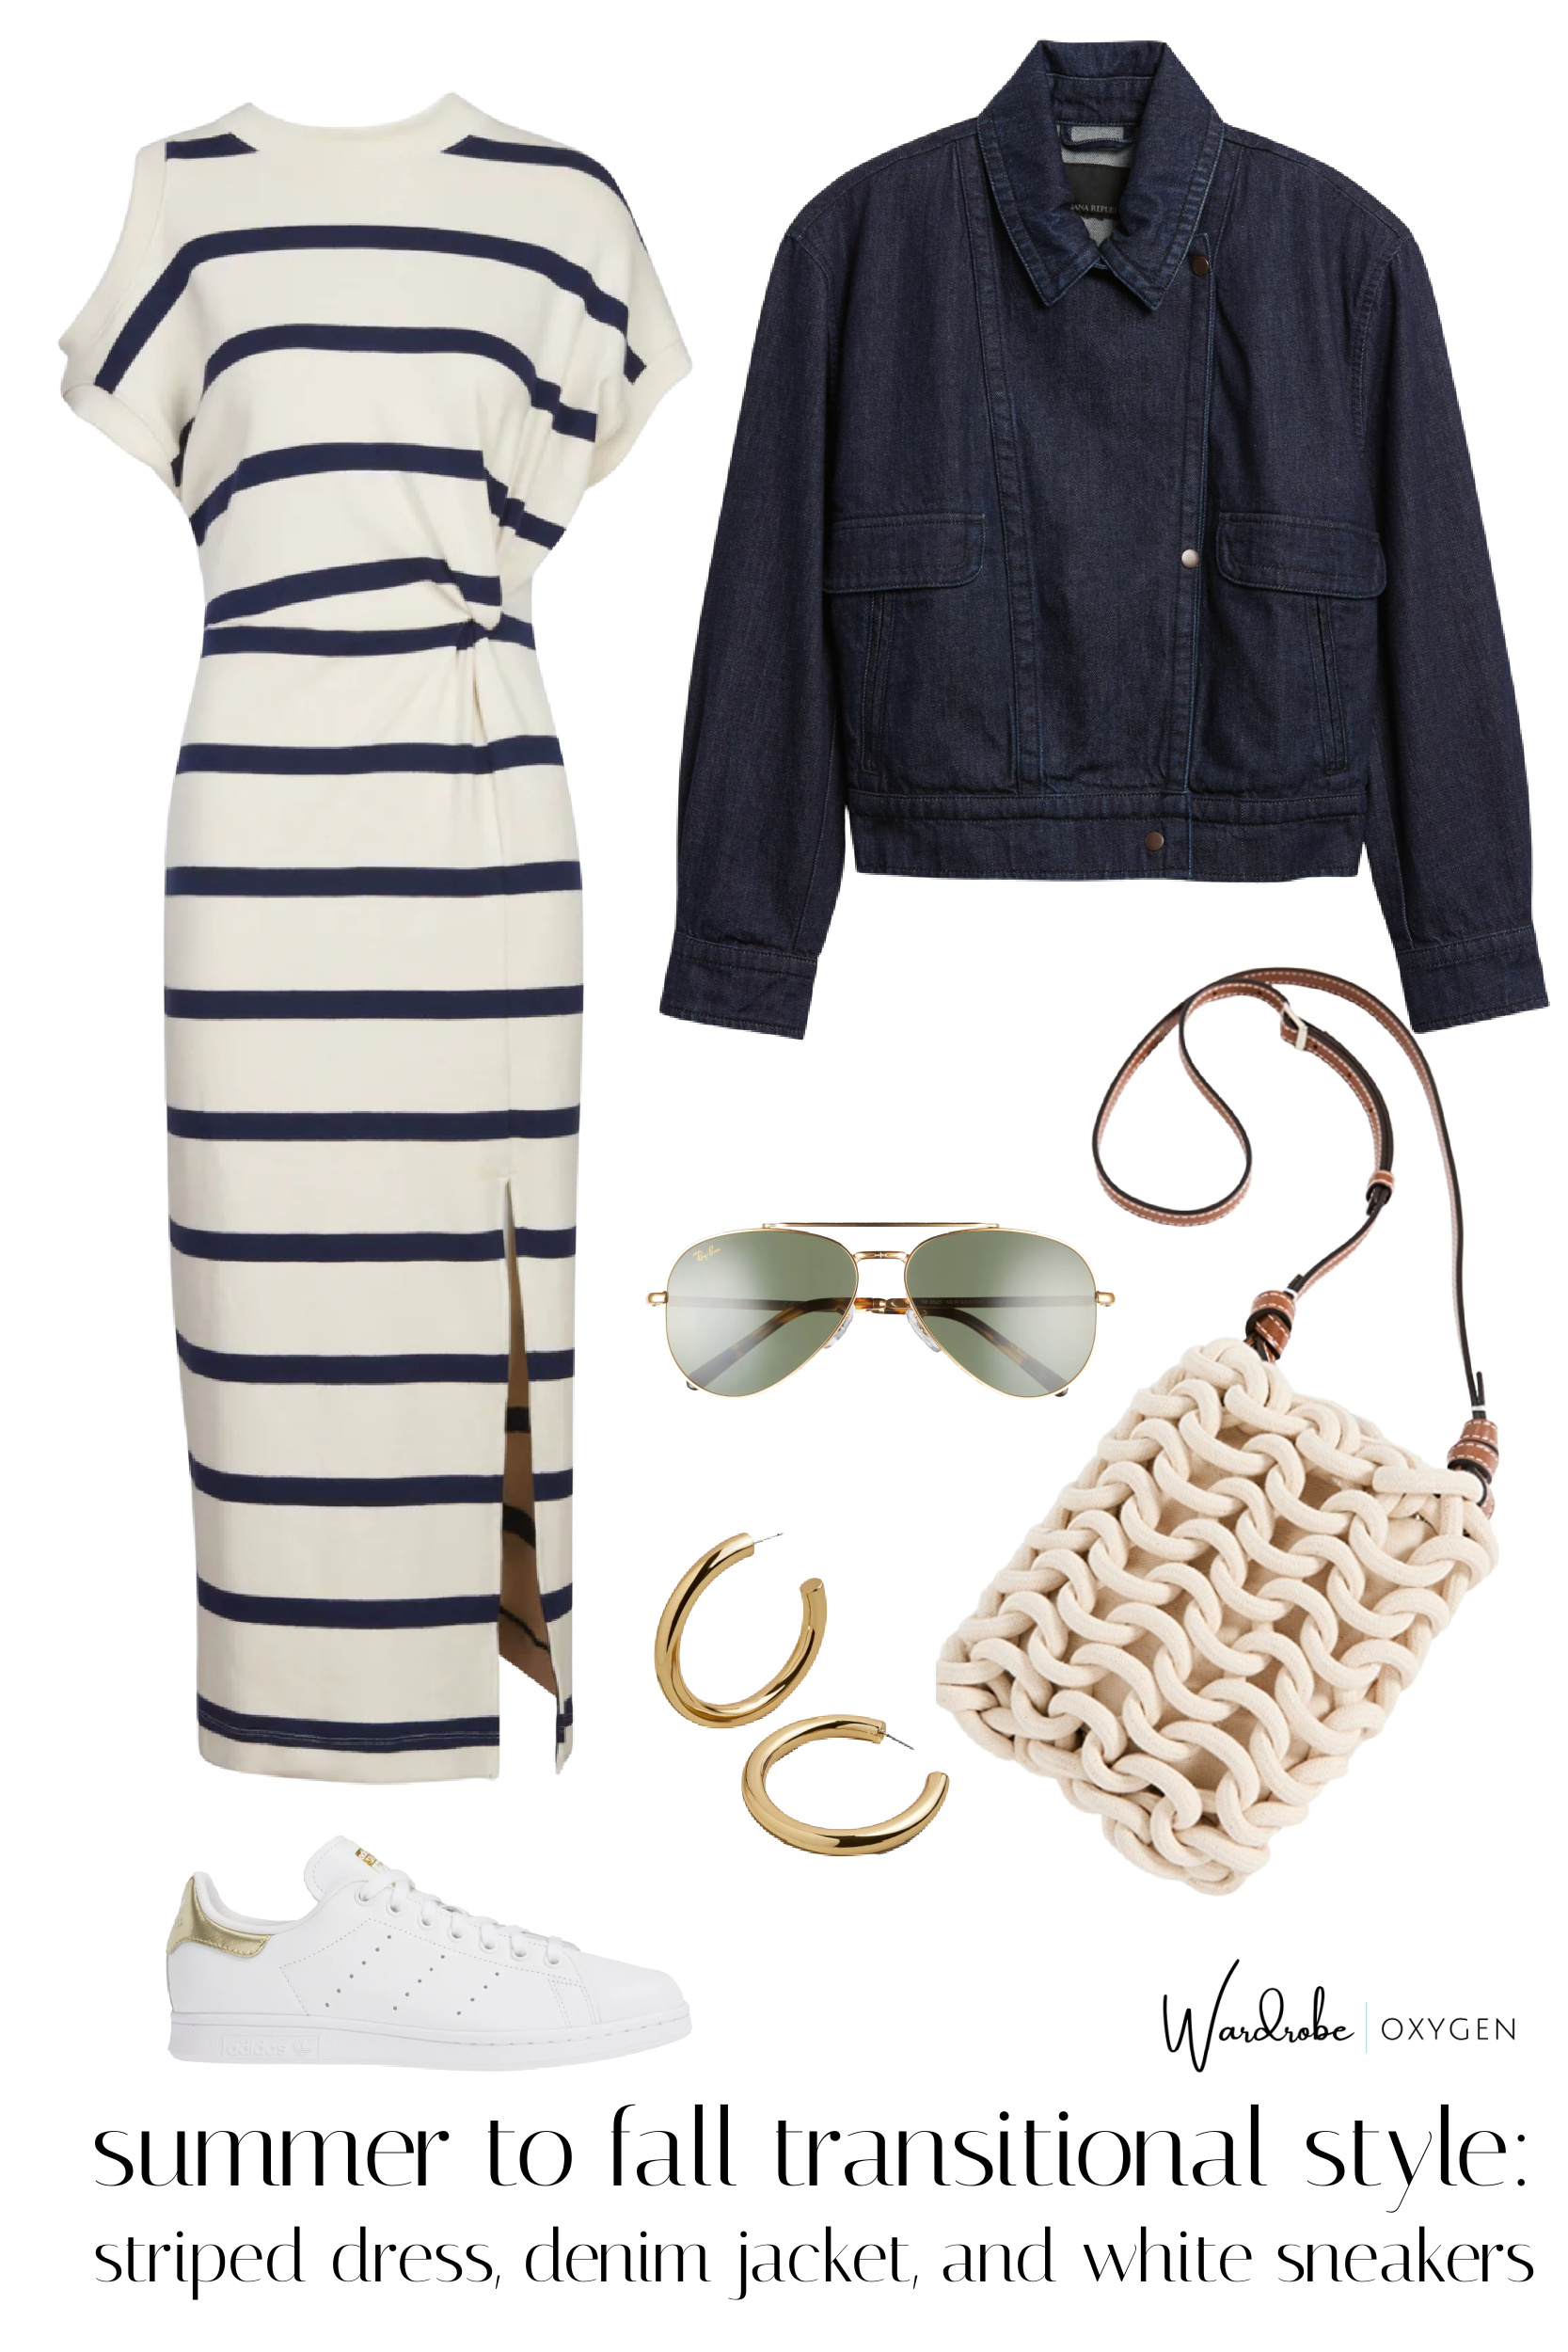 Updating the Classic Striped Dress and Denim Jacket